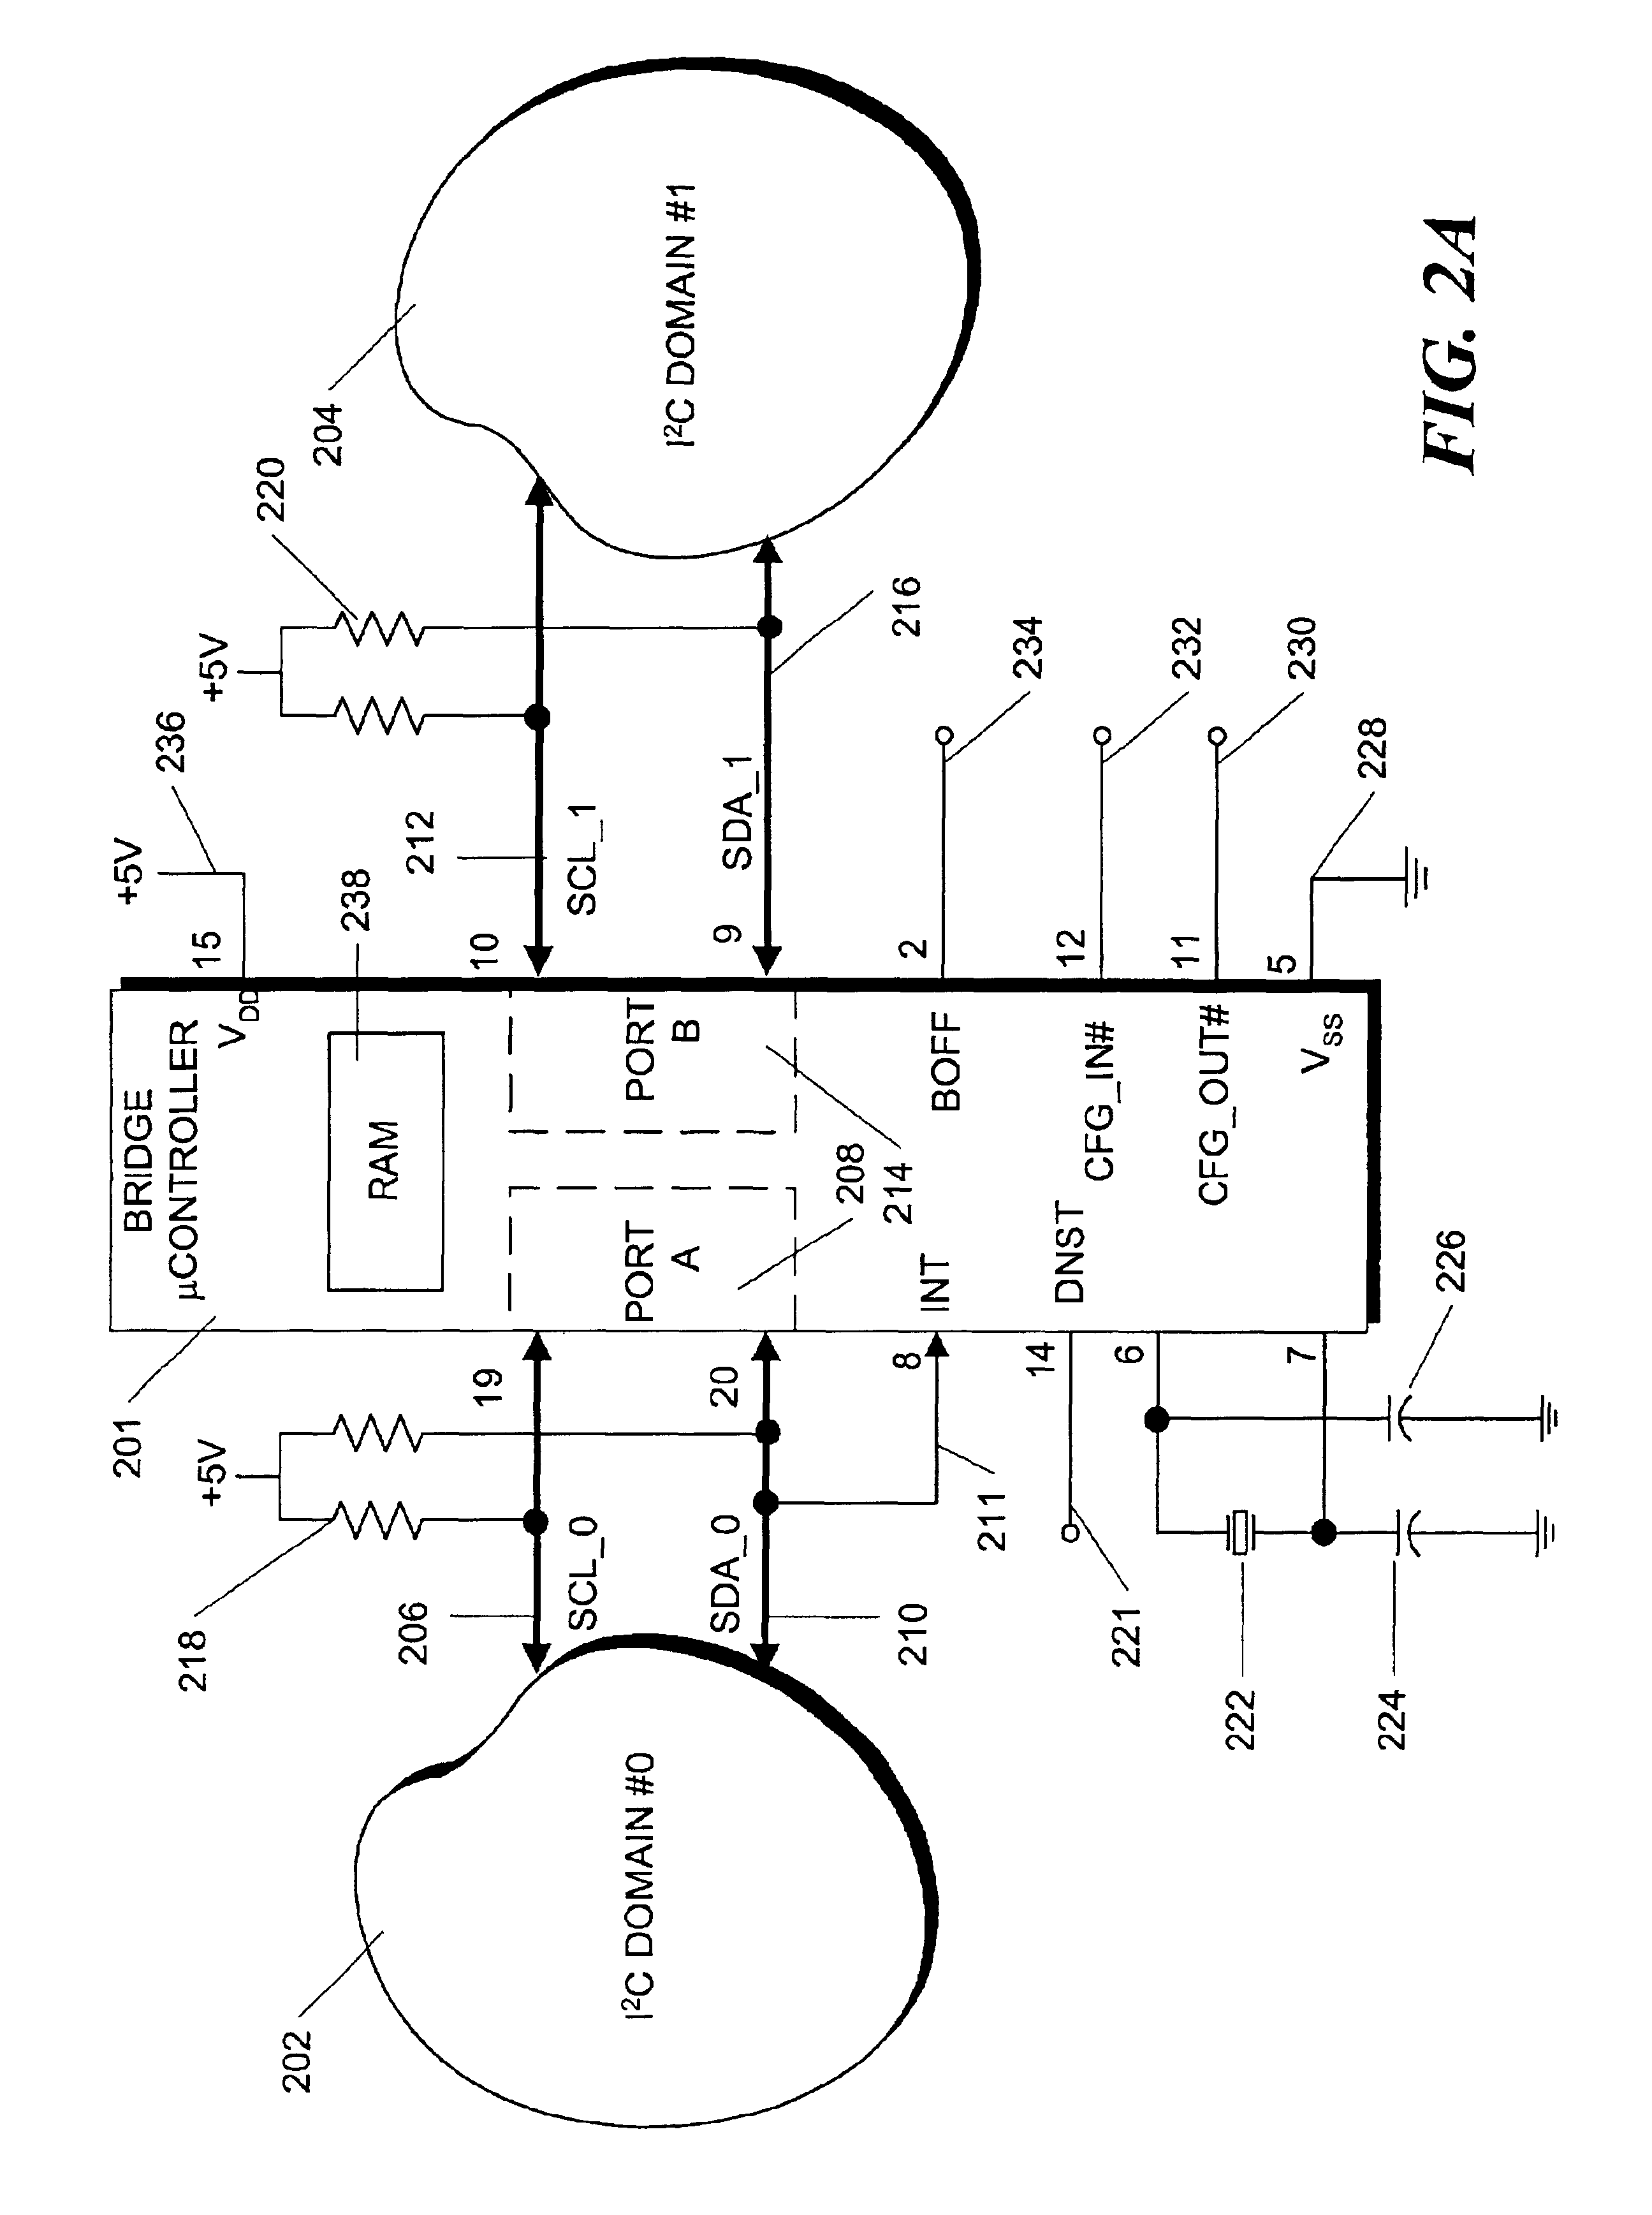 Method and apparatus for interconnecting wired-AND buses